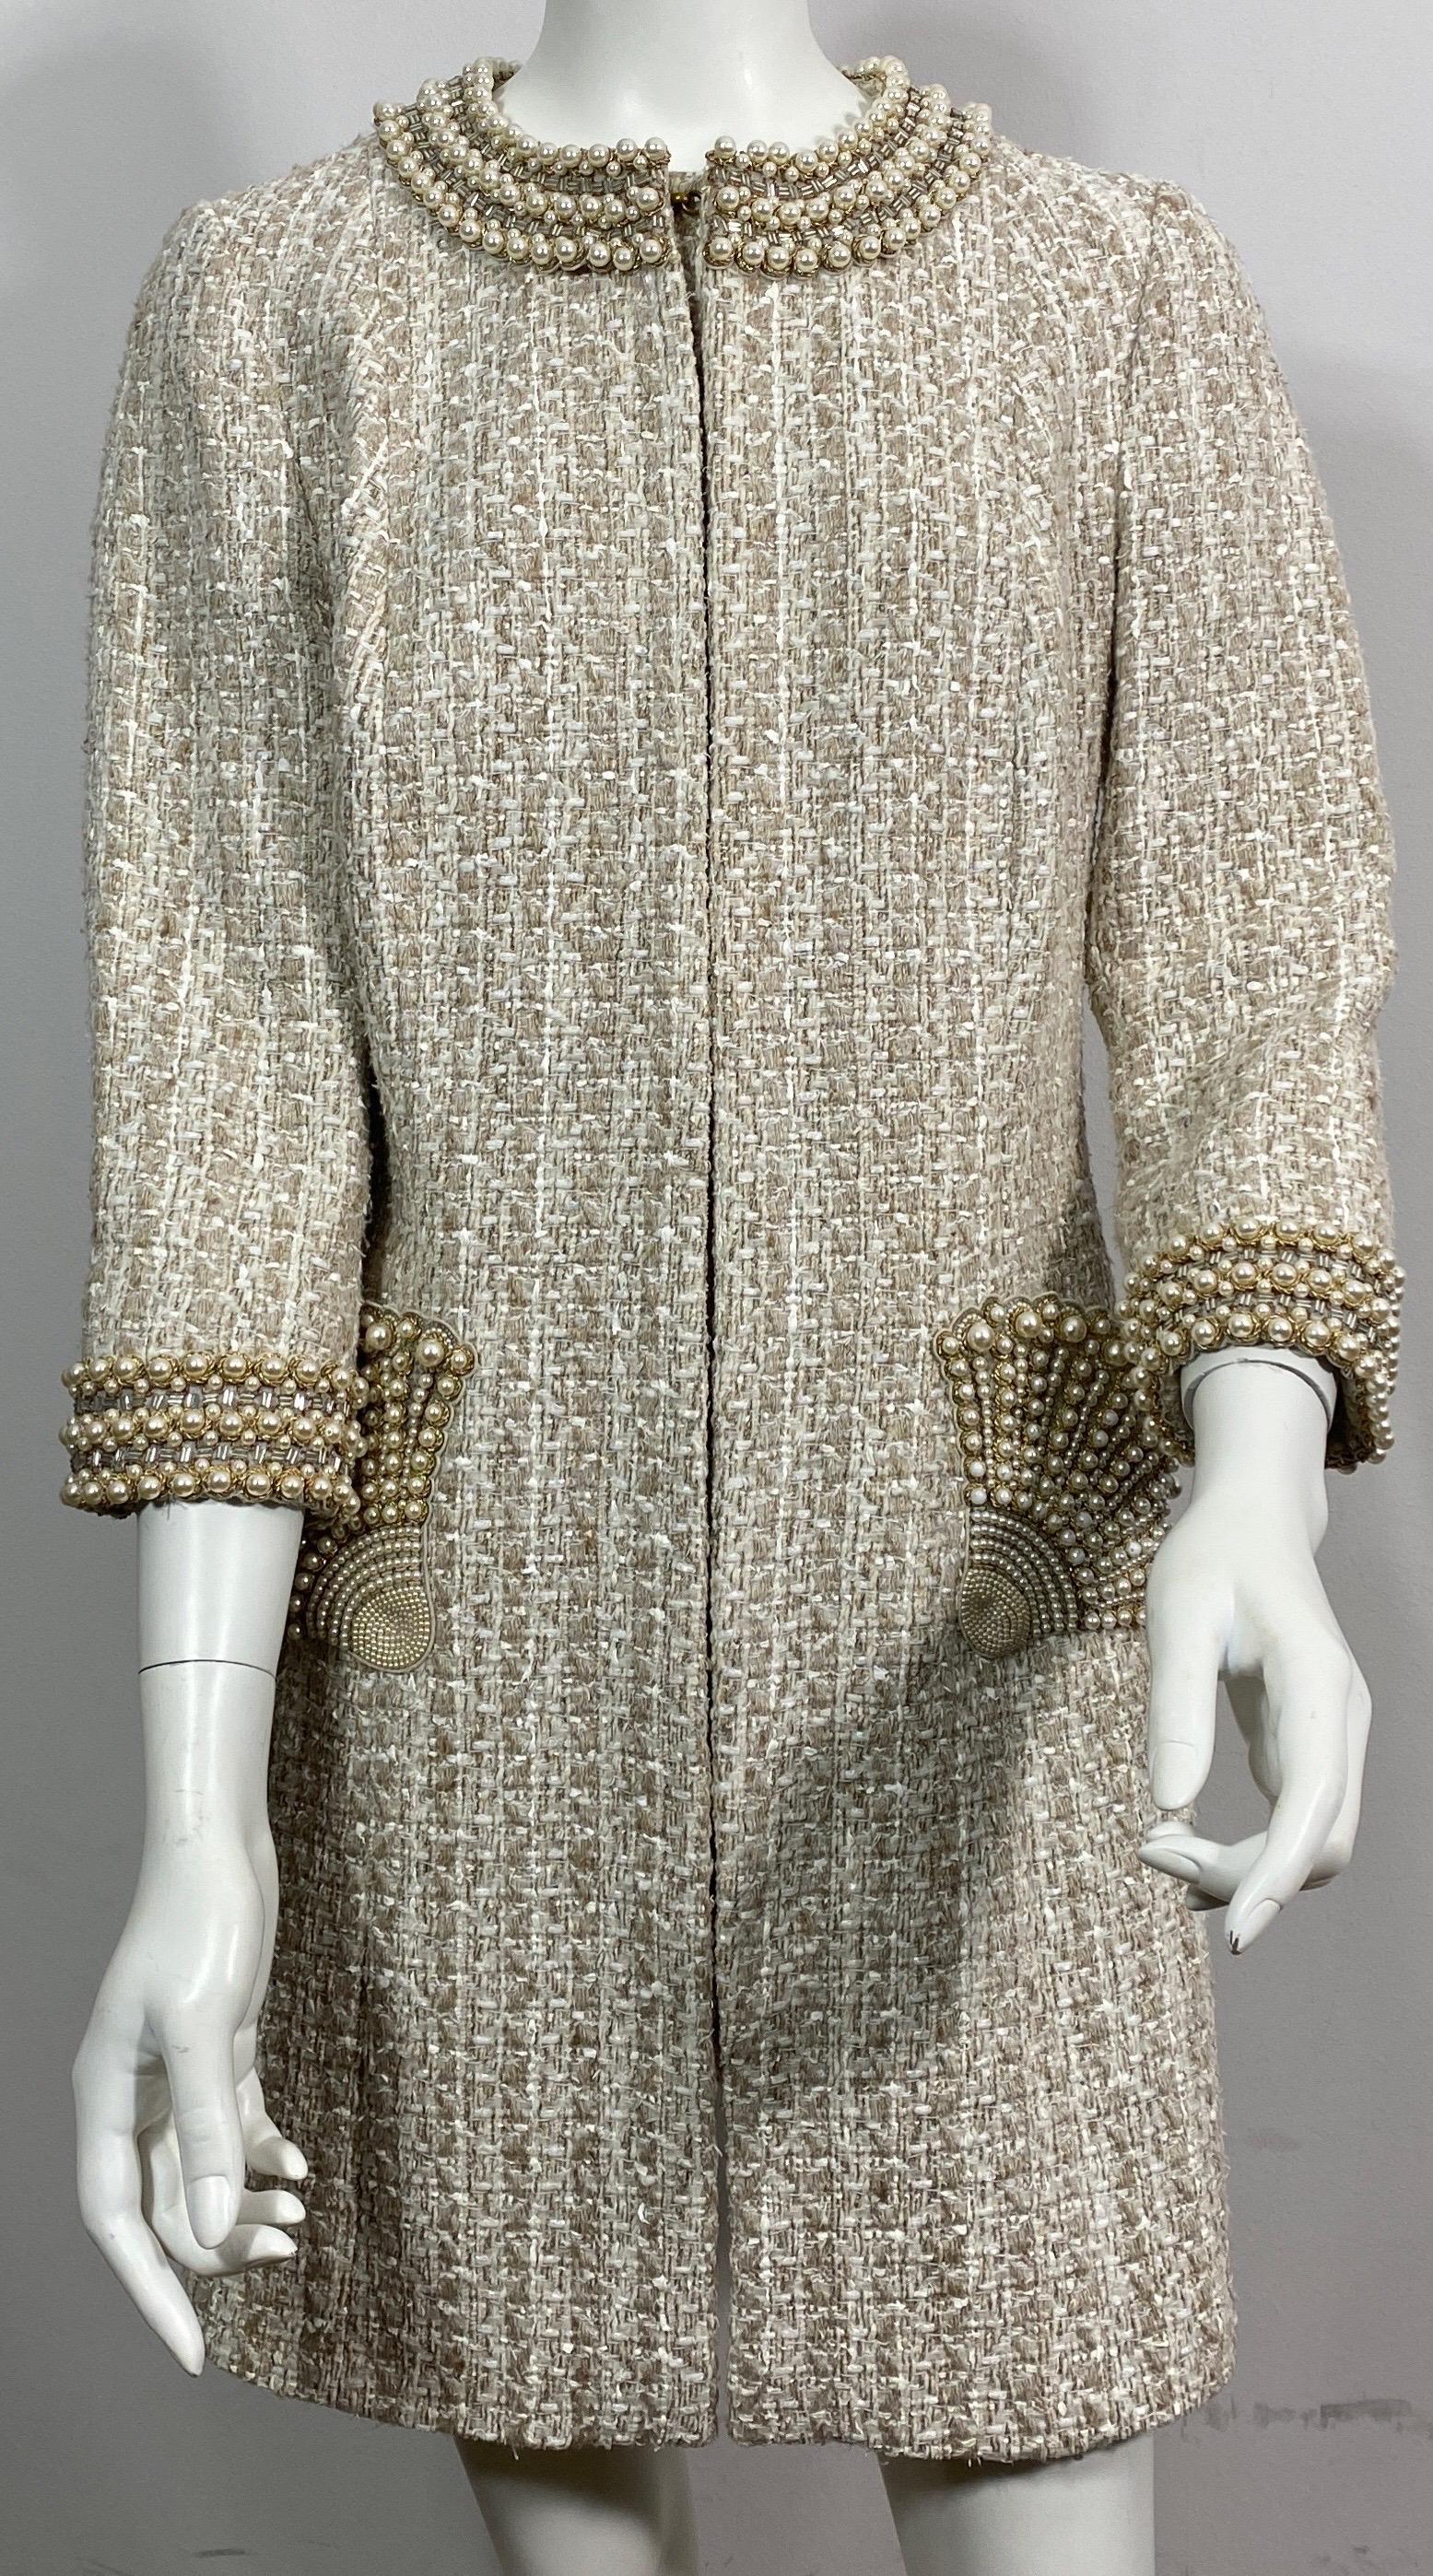 Andrew GN Beige and Ivory Boucle Tweed and Pearl Coat - 2005 Collection - Size M The fabric on this coat is a Beige and Ivory cotton/linen/silk blend Boucle Tweed and is fully lined in silk. The coat has a round neckline which is trimmed in a 2”